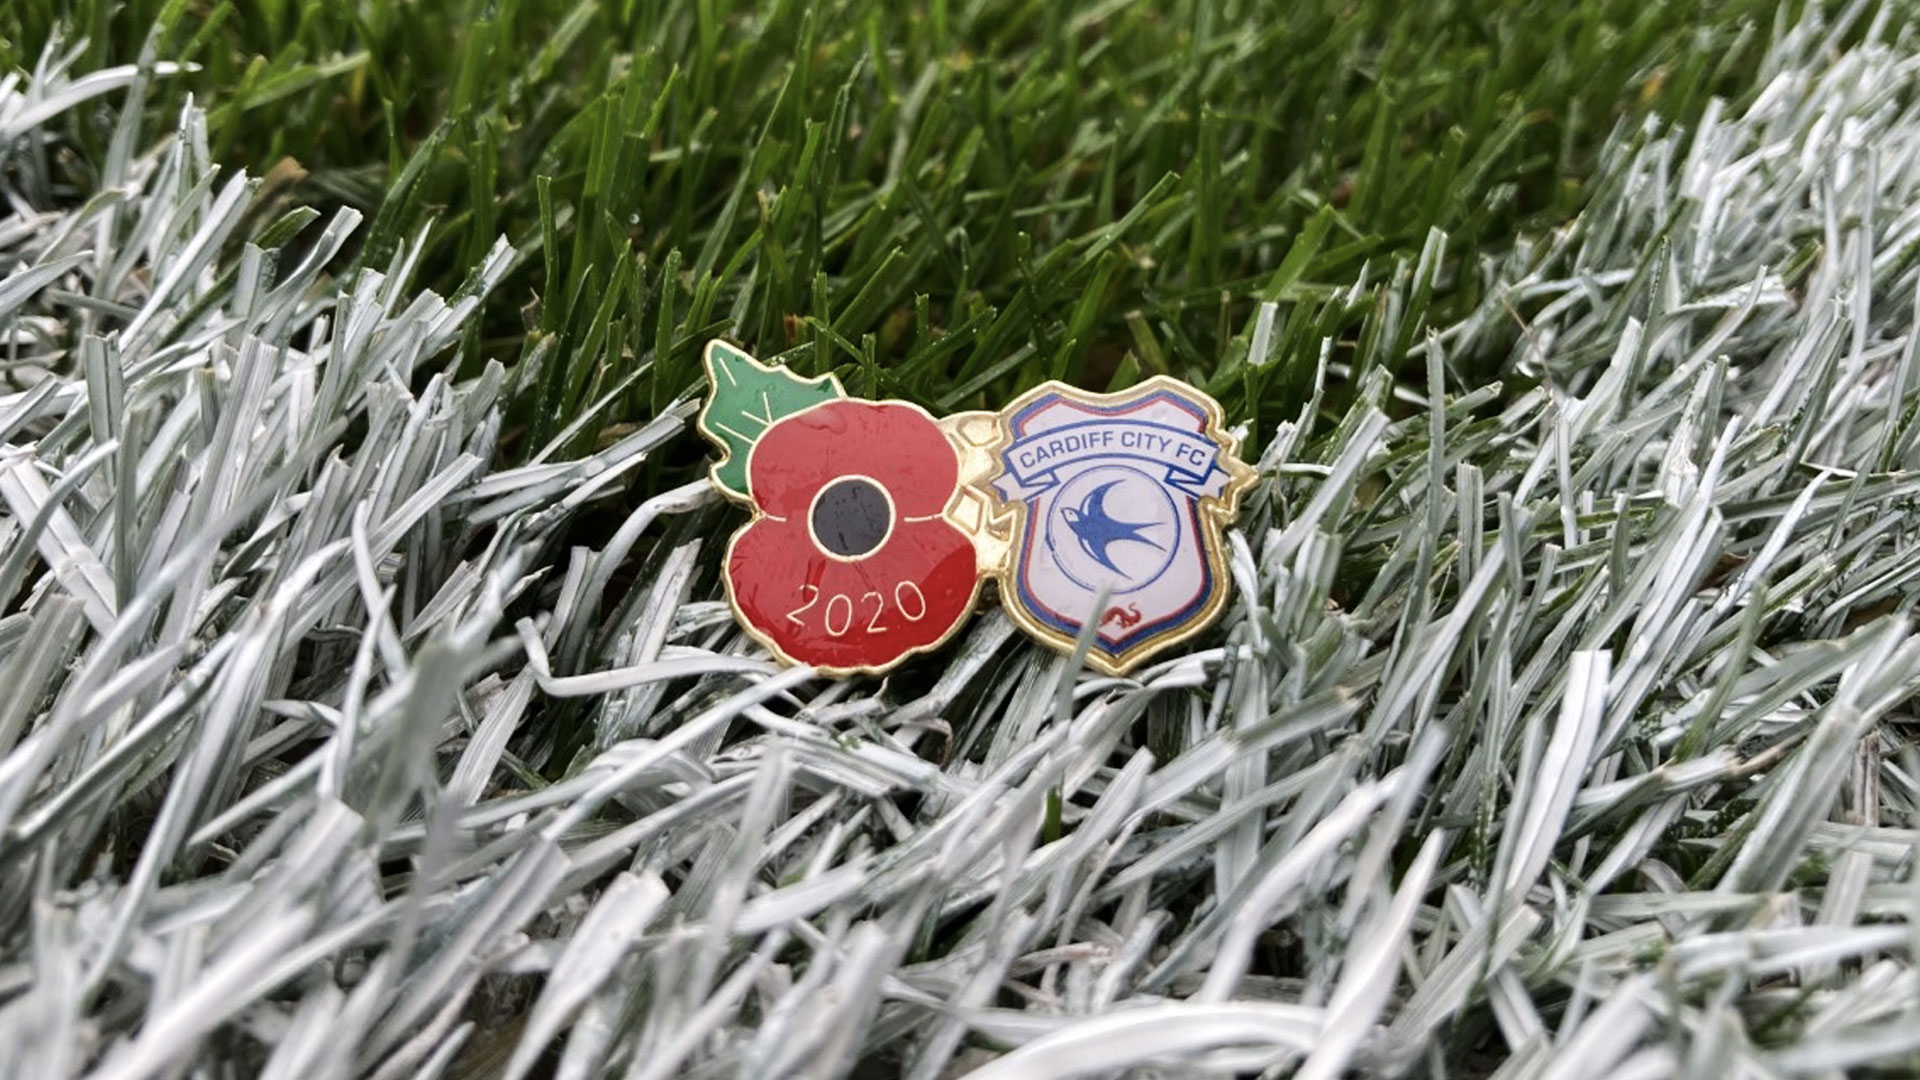 Our 2020 Poppy is now available...